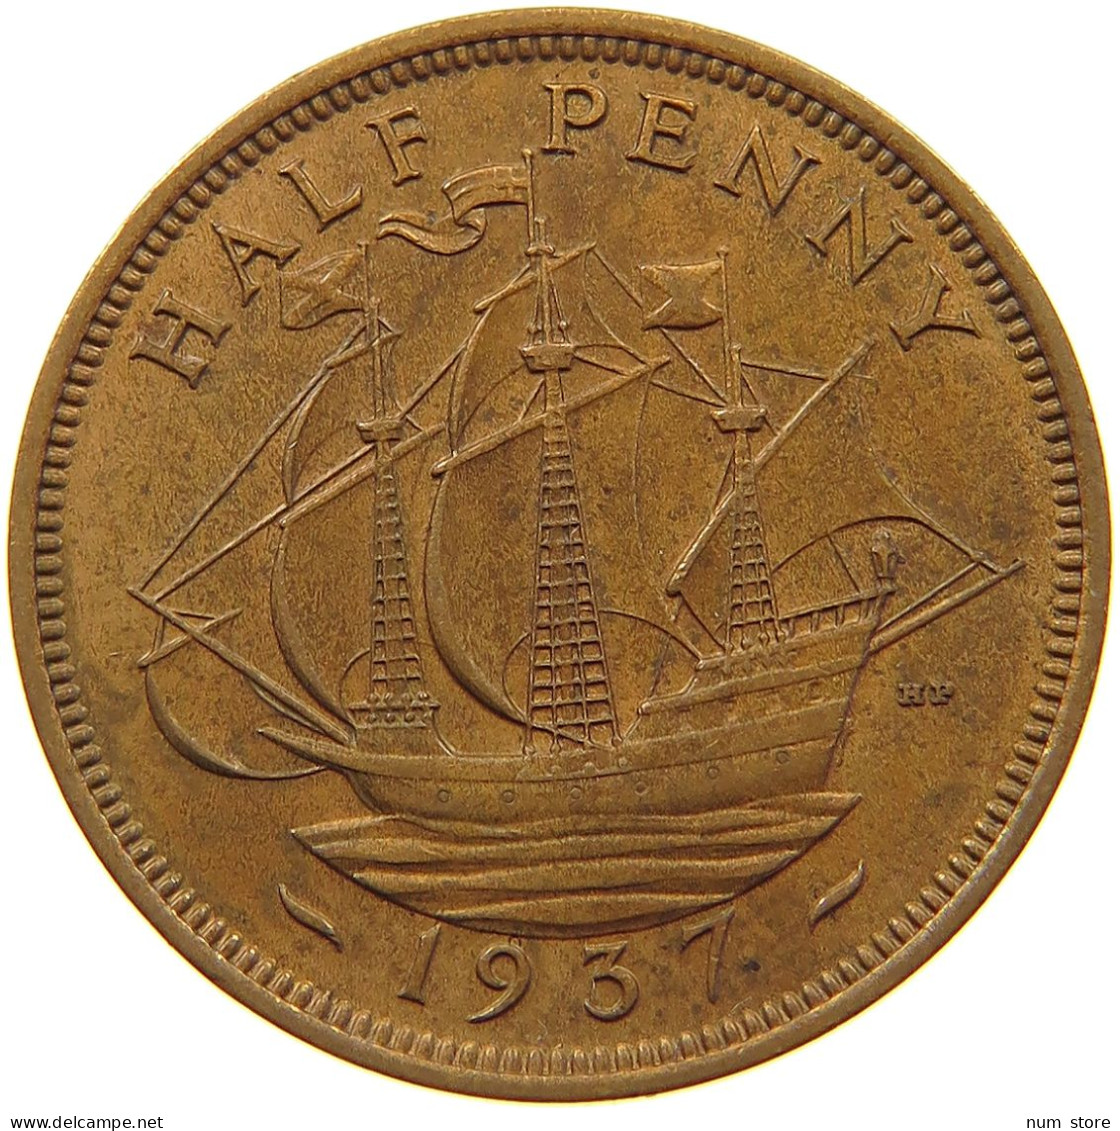 GREAT BRITAIN HALFPENNY 1937 #a010 0535 - C. 1/2 Penny